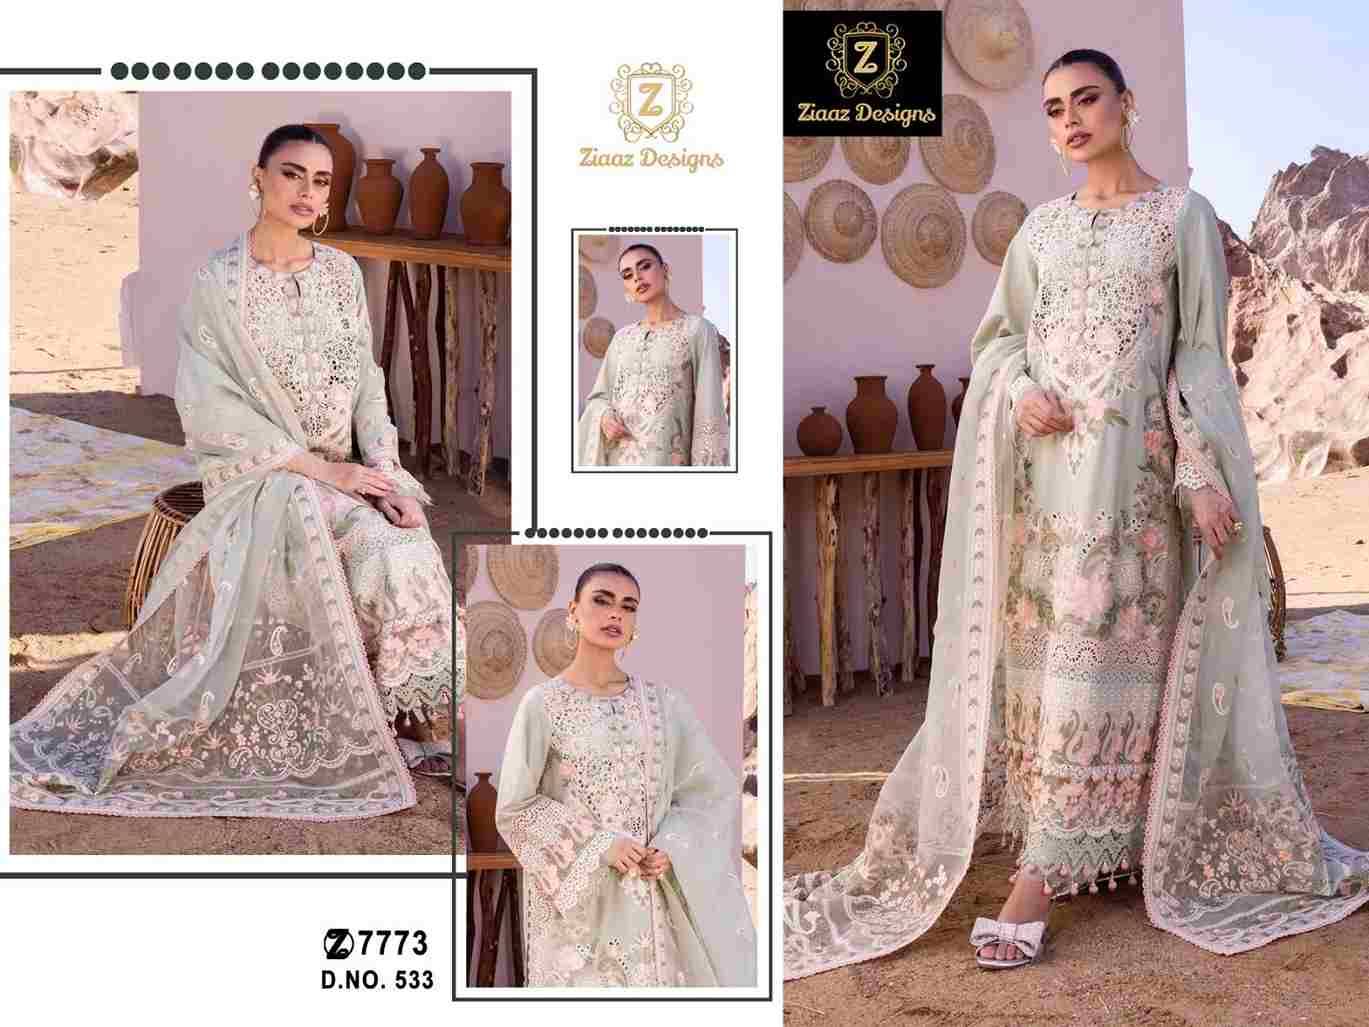 Ziaaz Designs Hit Design 533 By Ziaaz Designs Beautiful Pakistani Suits Colorful Stylish Fancy Casual Wear & Ethnic Wear Cambric Cotton Embroidered Dresses At Wholesale Price